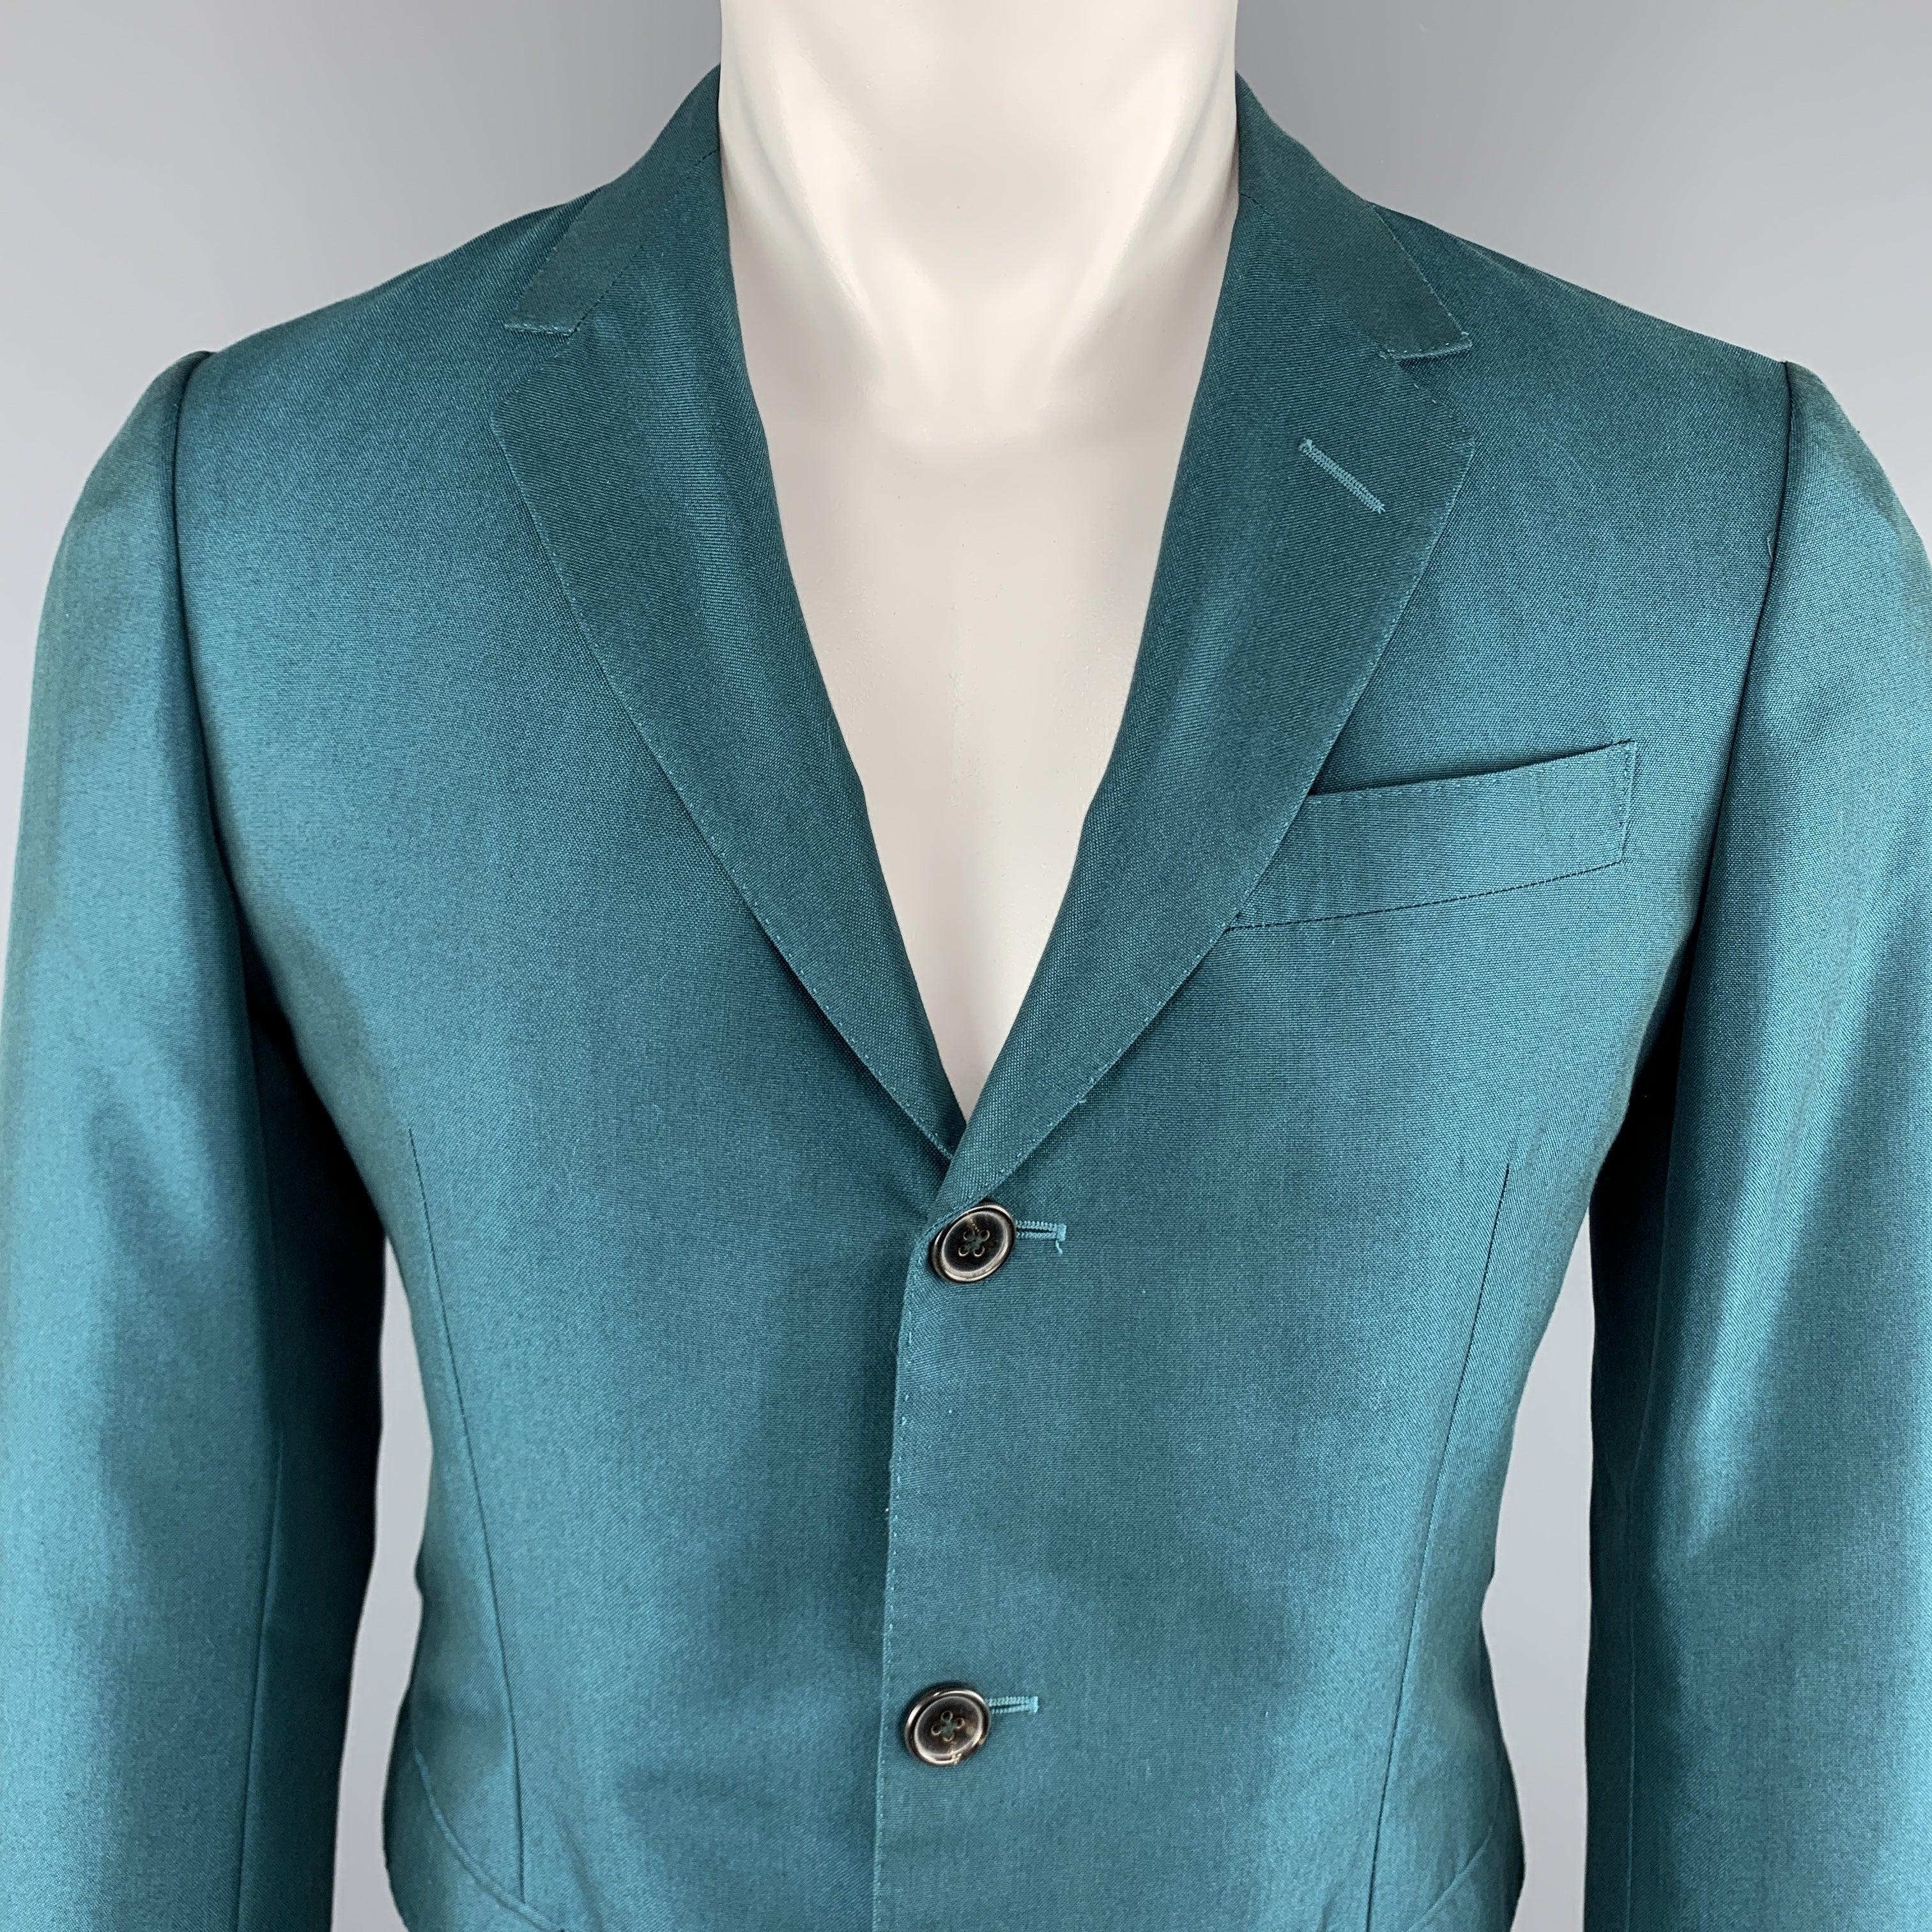 MARNI
Sport Coat comes in a teal tone in a solid wool material, with a notch lapel, slit and flap pockets, three buttons at closure, single breasted, a single vent at back, and functional buttons at cuffs.
Excellent Pre-Owned Condition. 

Marked:  